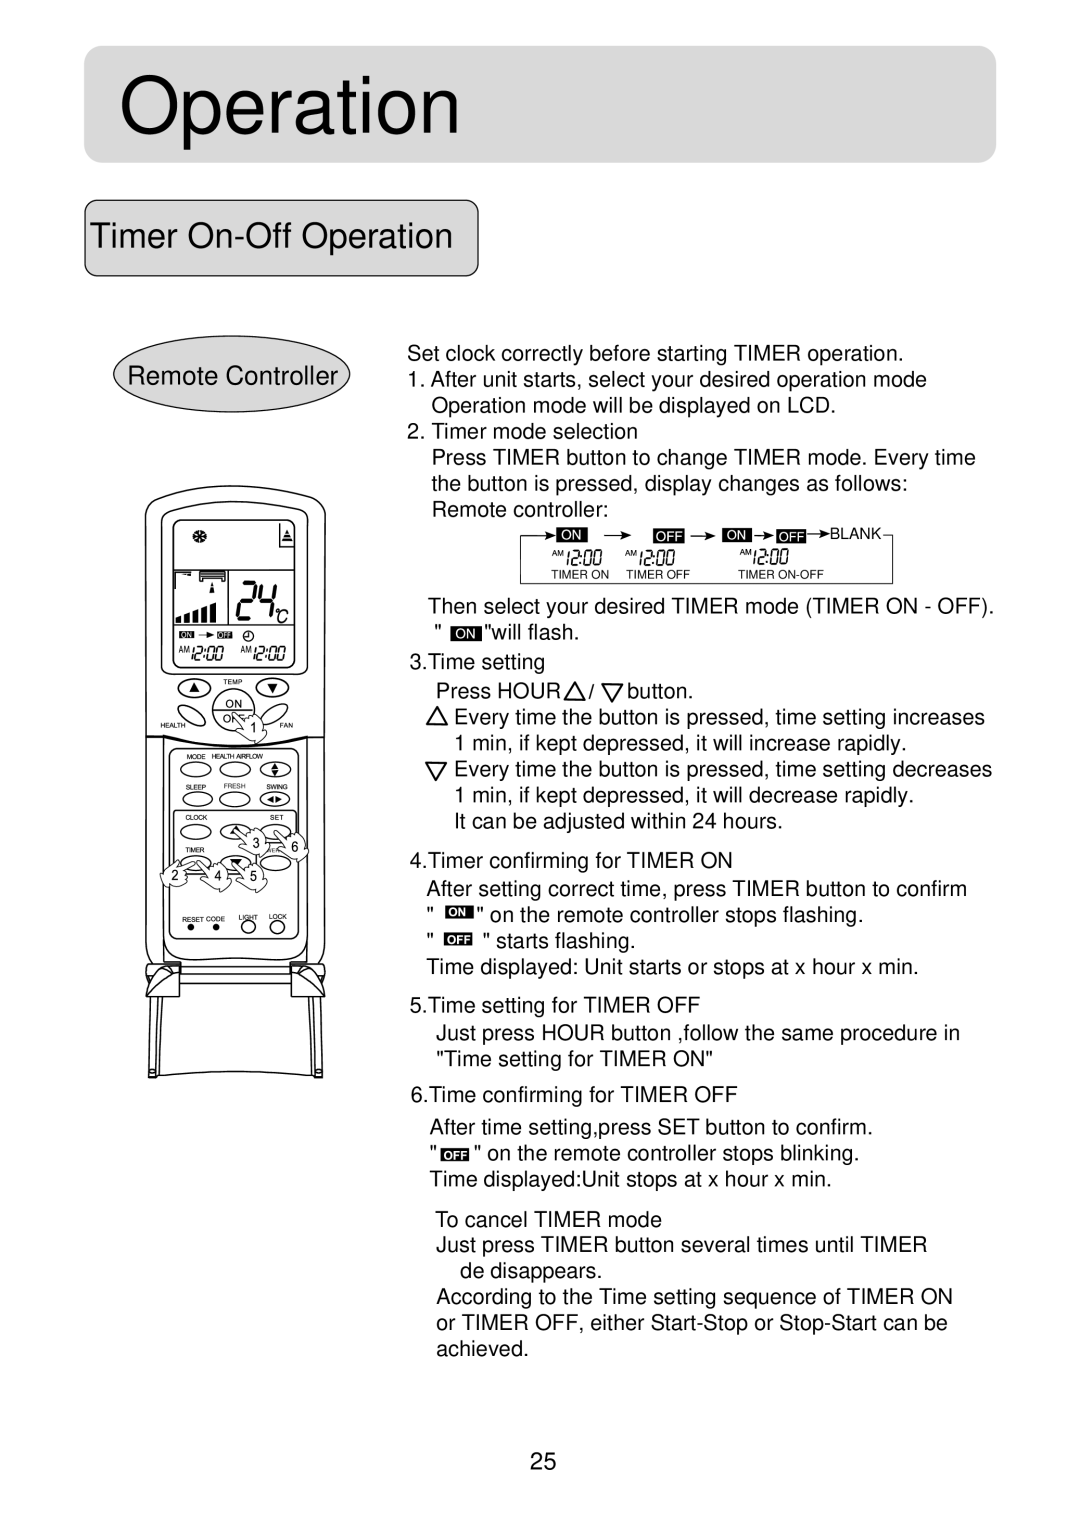 Haier HSM09HS03, 2HUM18H03, HSM12HS03, HSU-09R04, HSU-12R04, HSU-18R04, HSU-24R04 Timer On-OffOperation, Remote Controller 